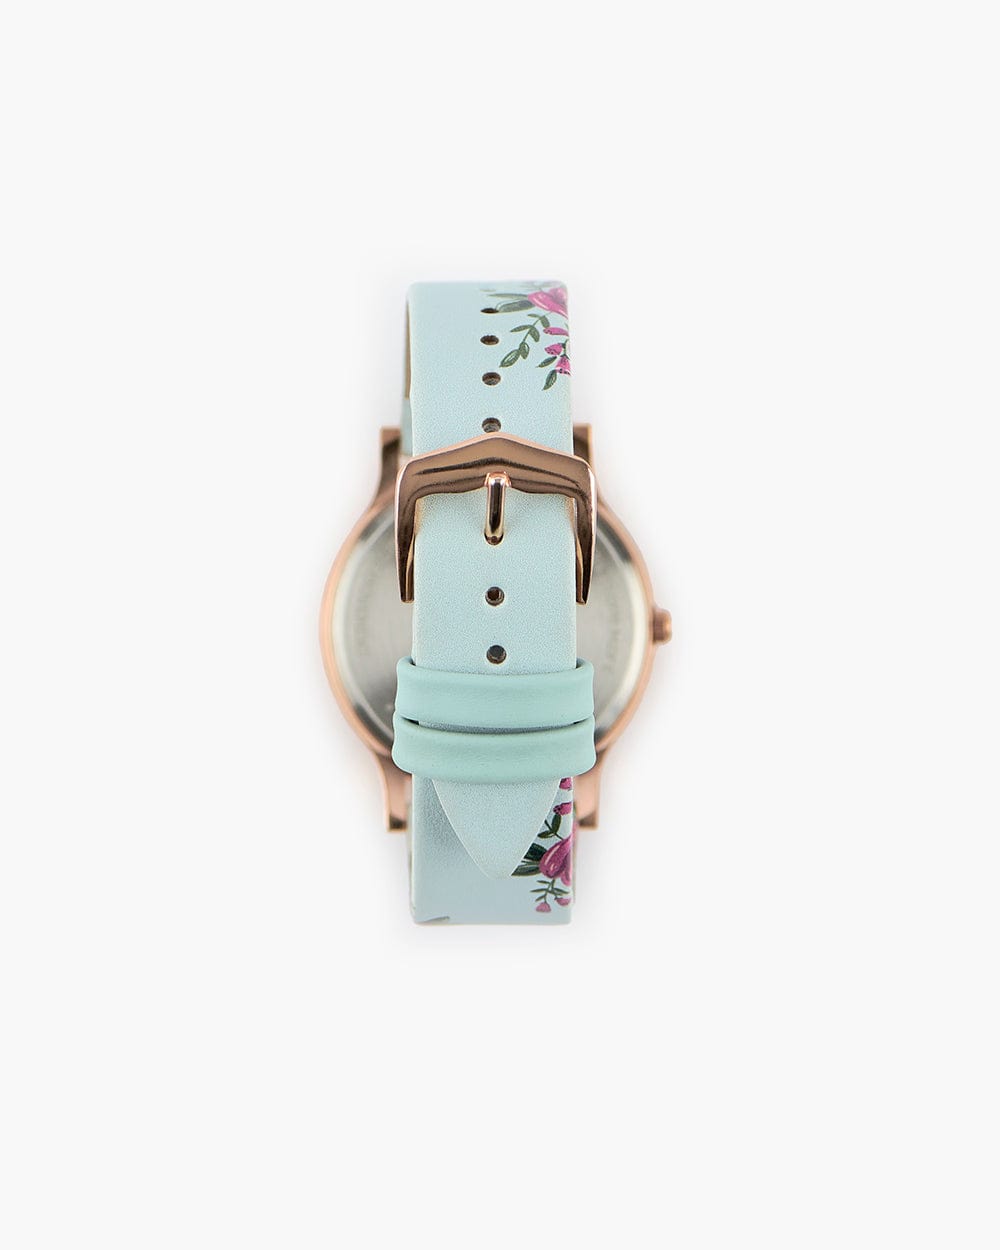 TEAL by Chumbak Jungle Flowers Watch-Mint